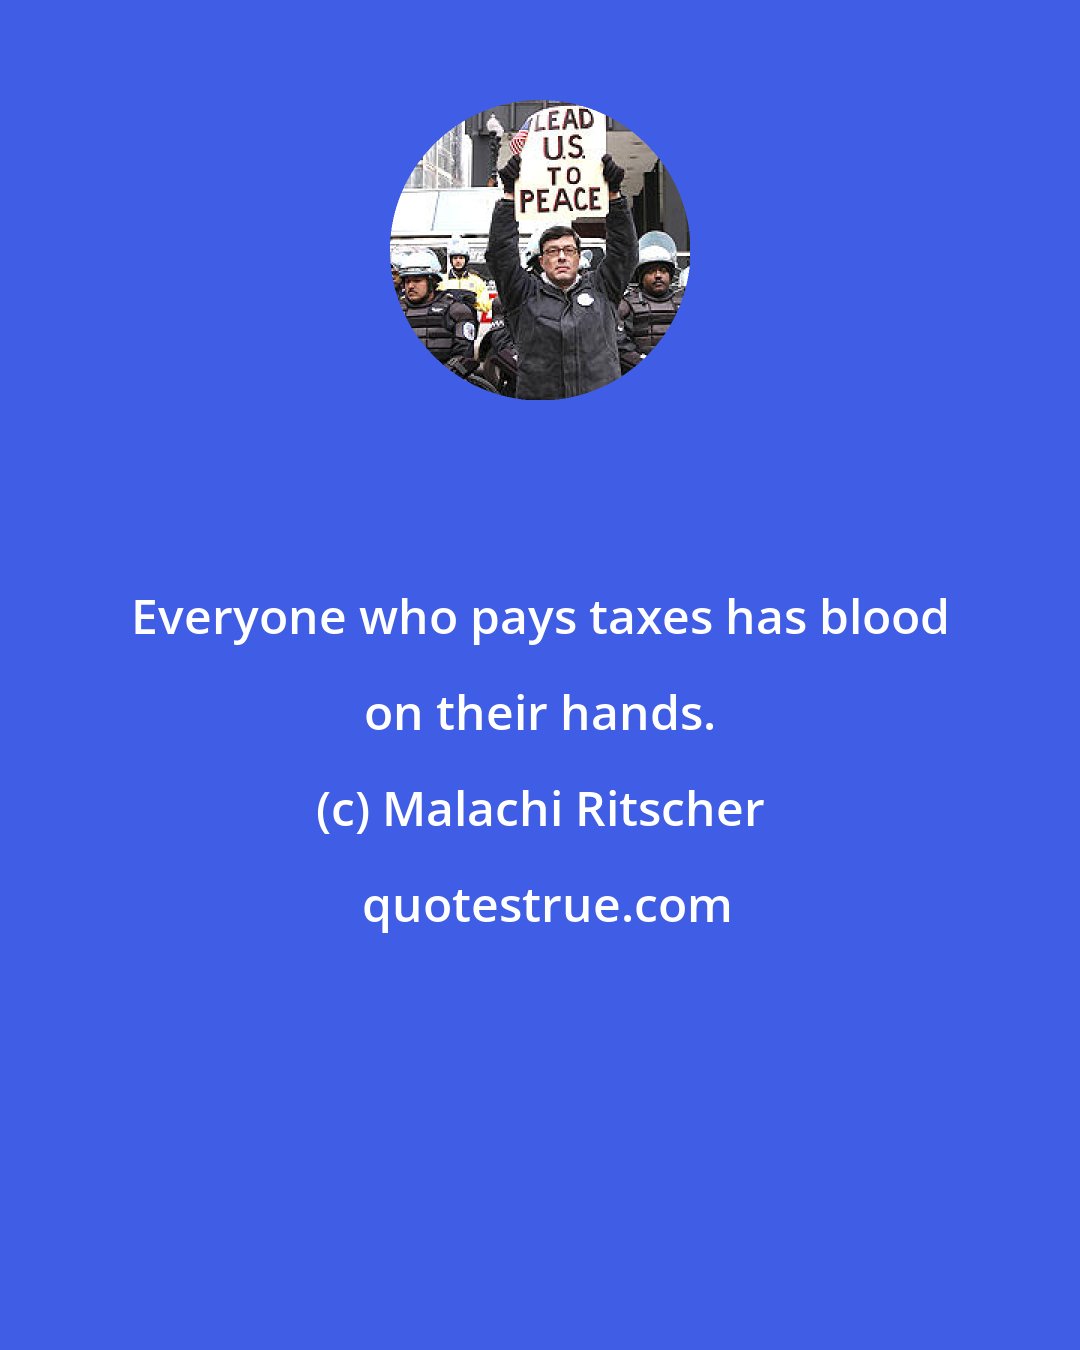 Malachi Ritscher: Everyone who pays taxes has blood on their hands.